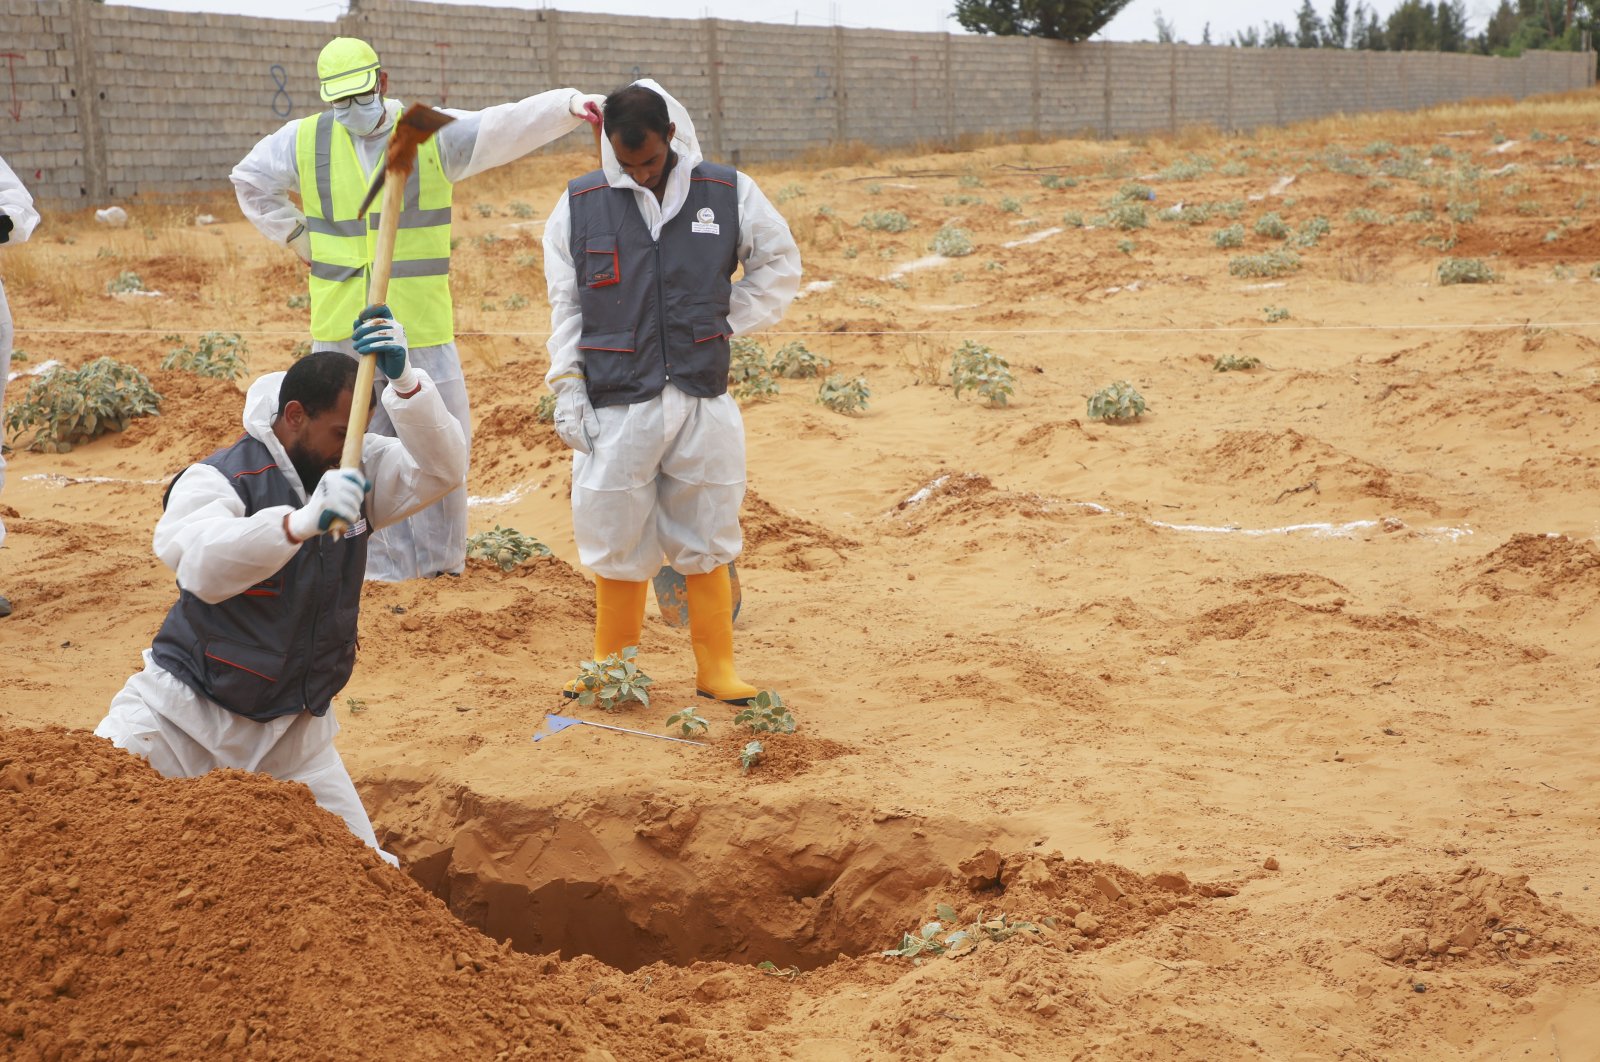 Libyan Ministry of Justice employees dig out at a site of a suspected mass grave in the town of Tarhuna, Libya, June 23, 2020. (AP)